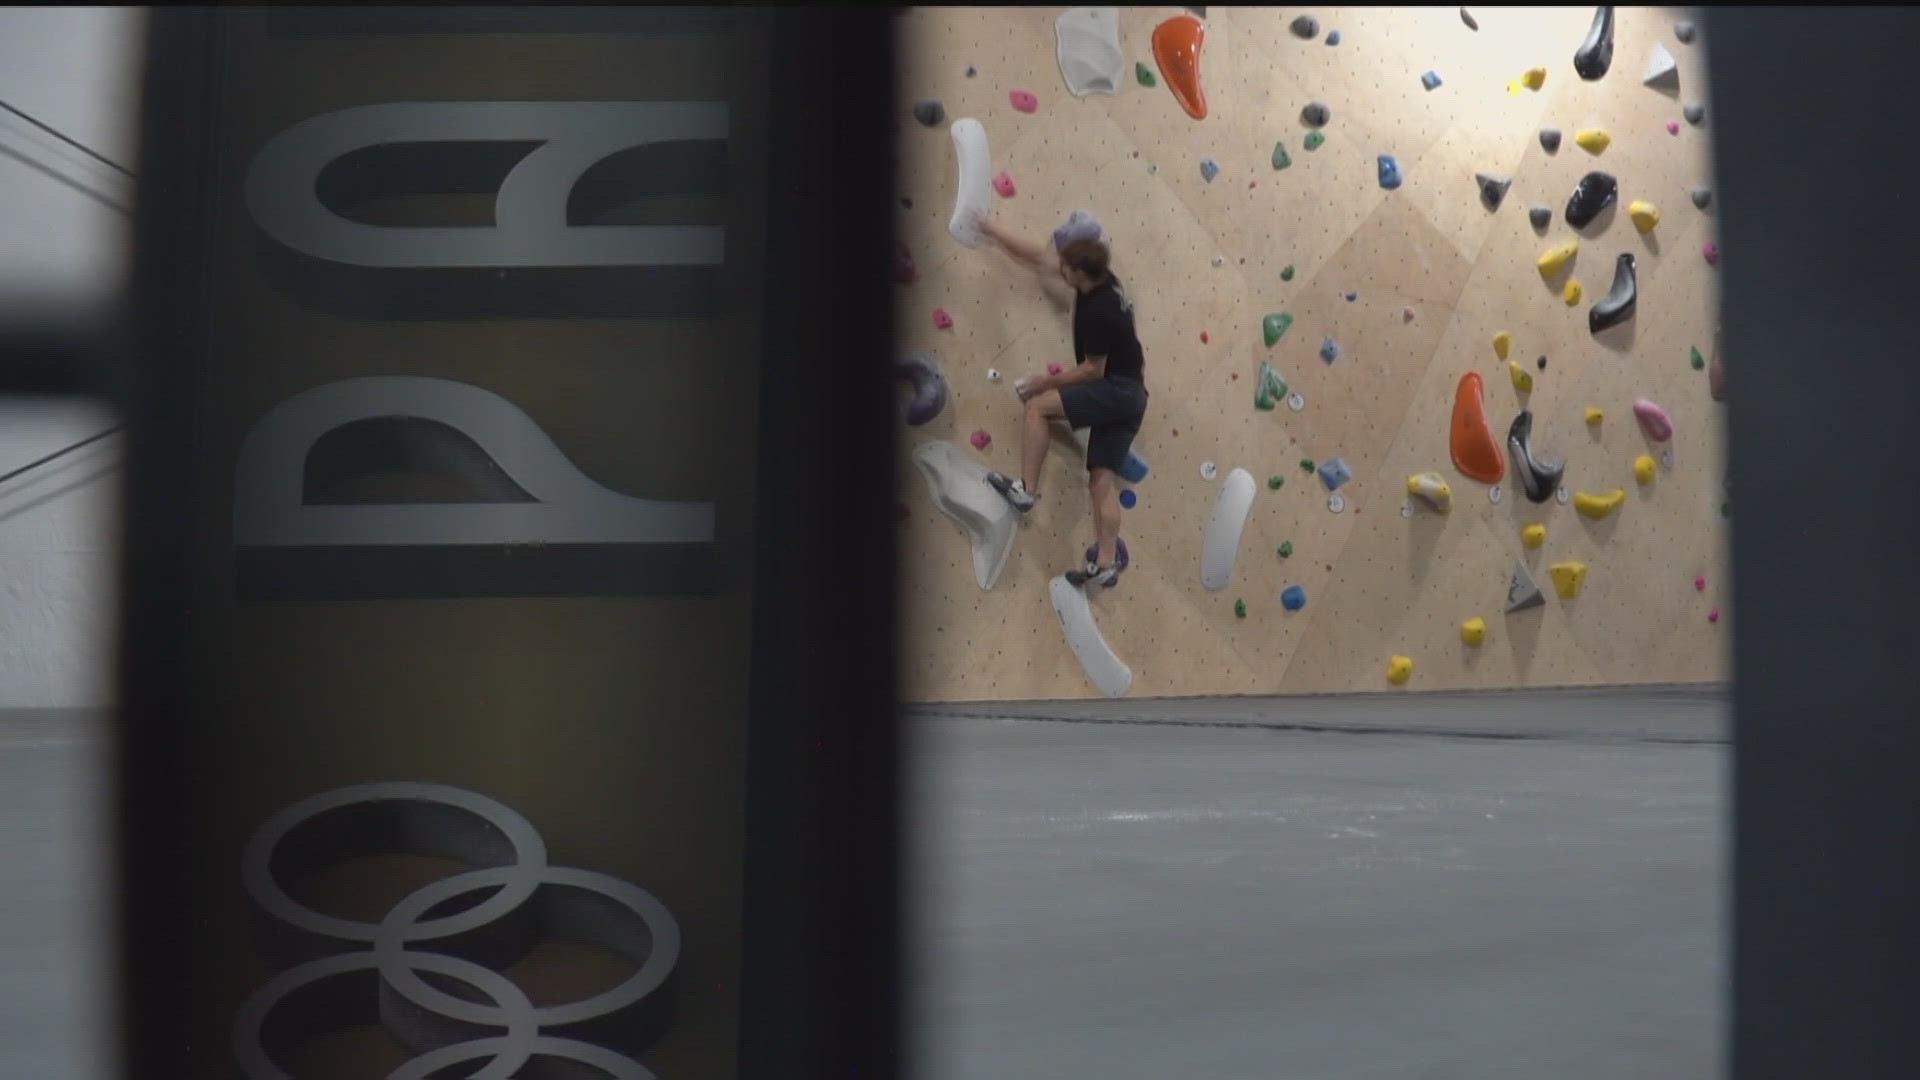 Colorado athletes will participate in rock climbing, cycling, and air rifle, among other sports at the games in Paris starting in July.